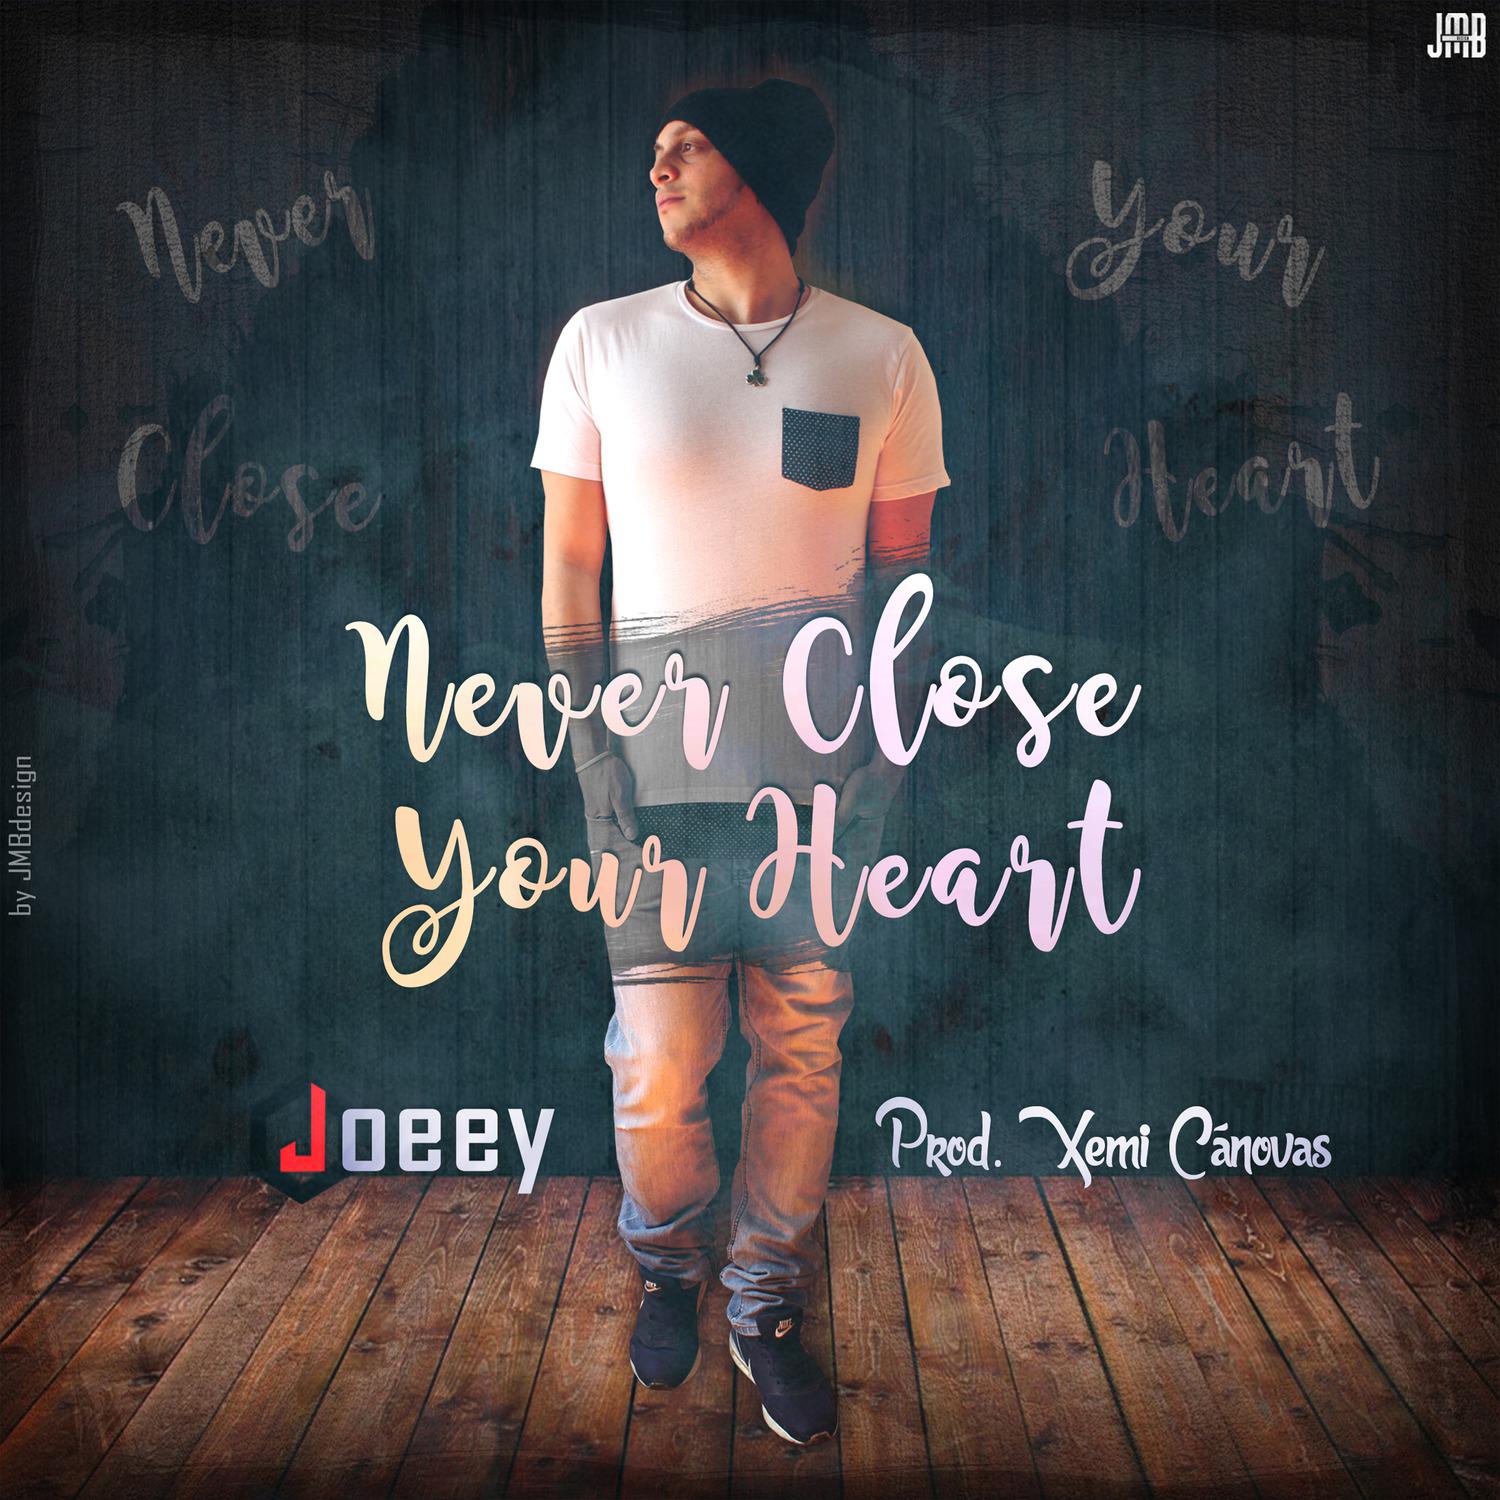 Never Close Your Heart